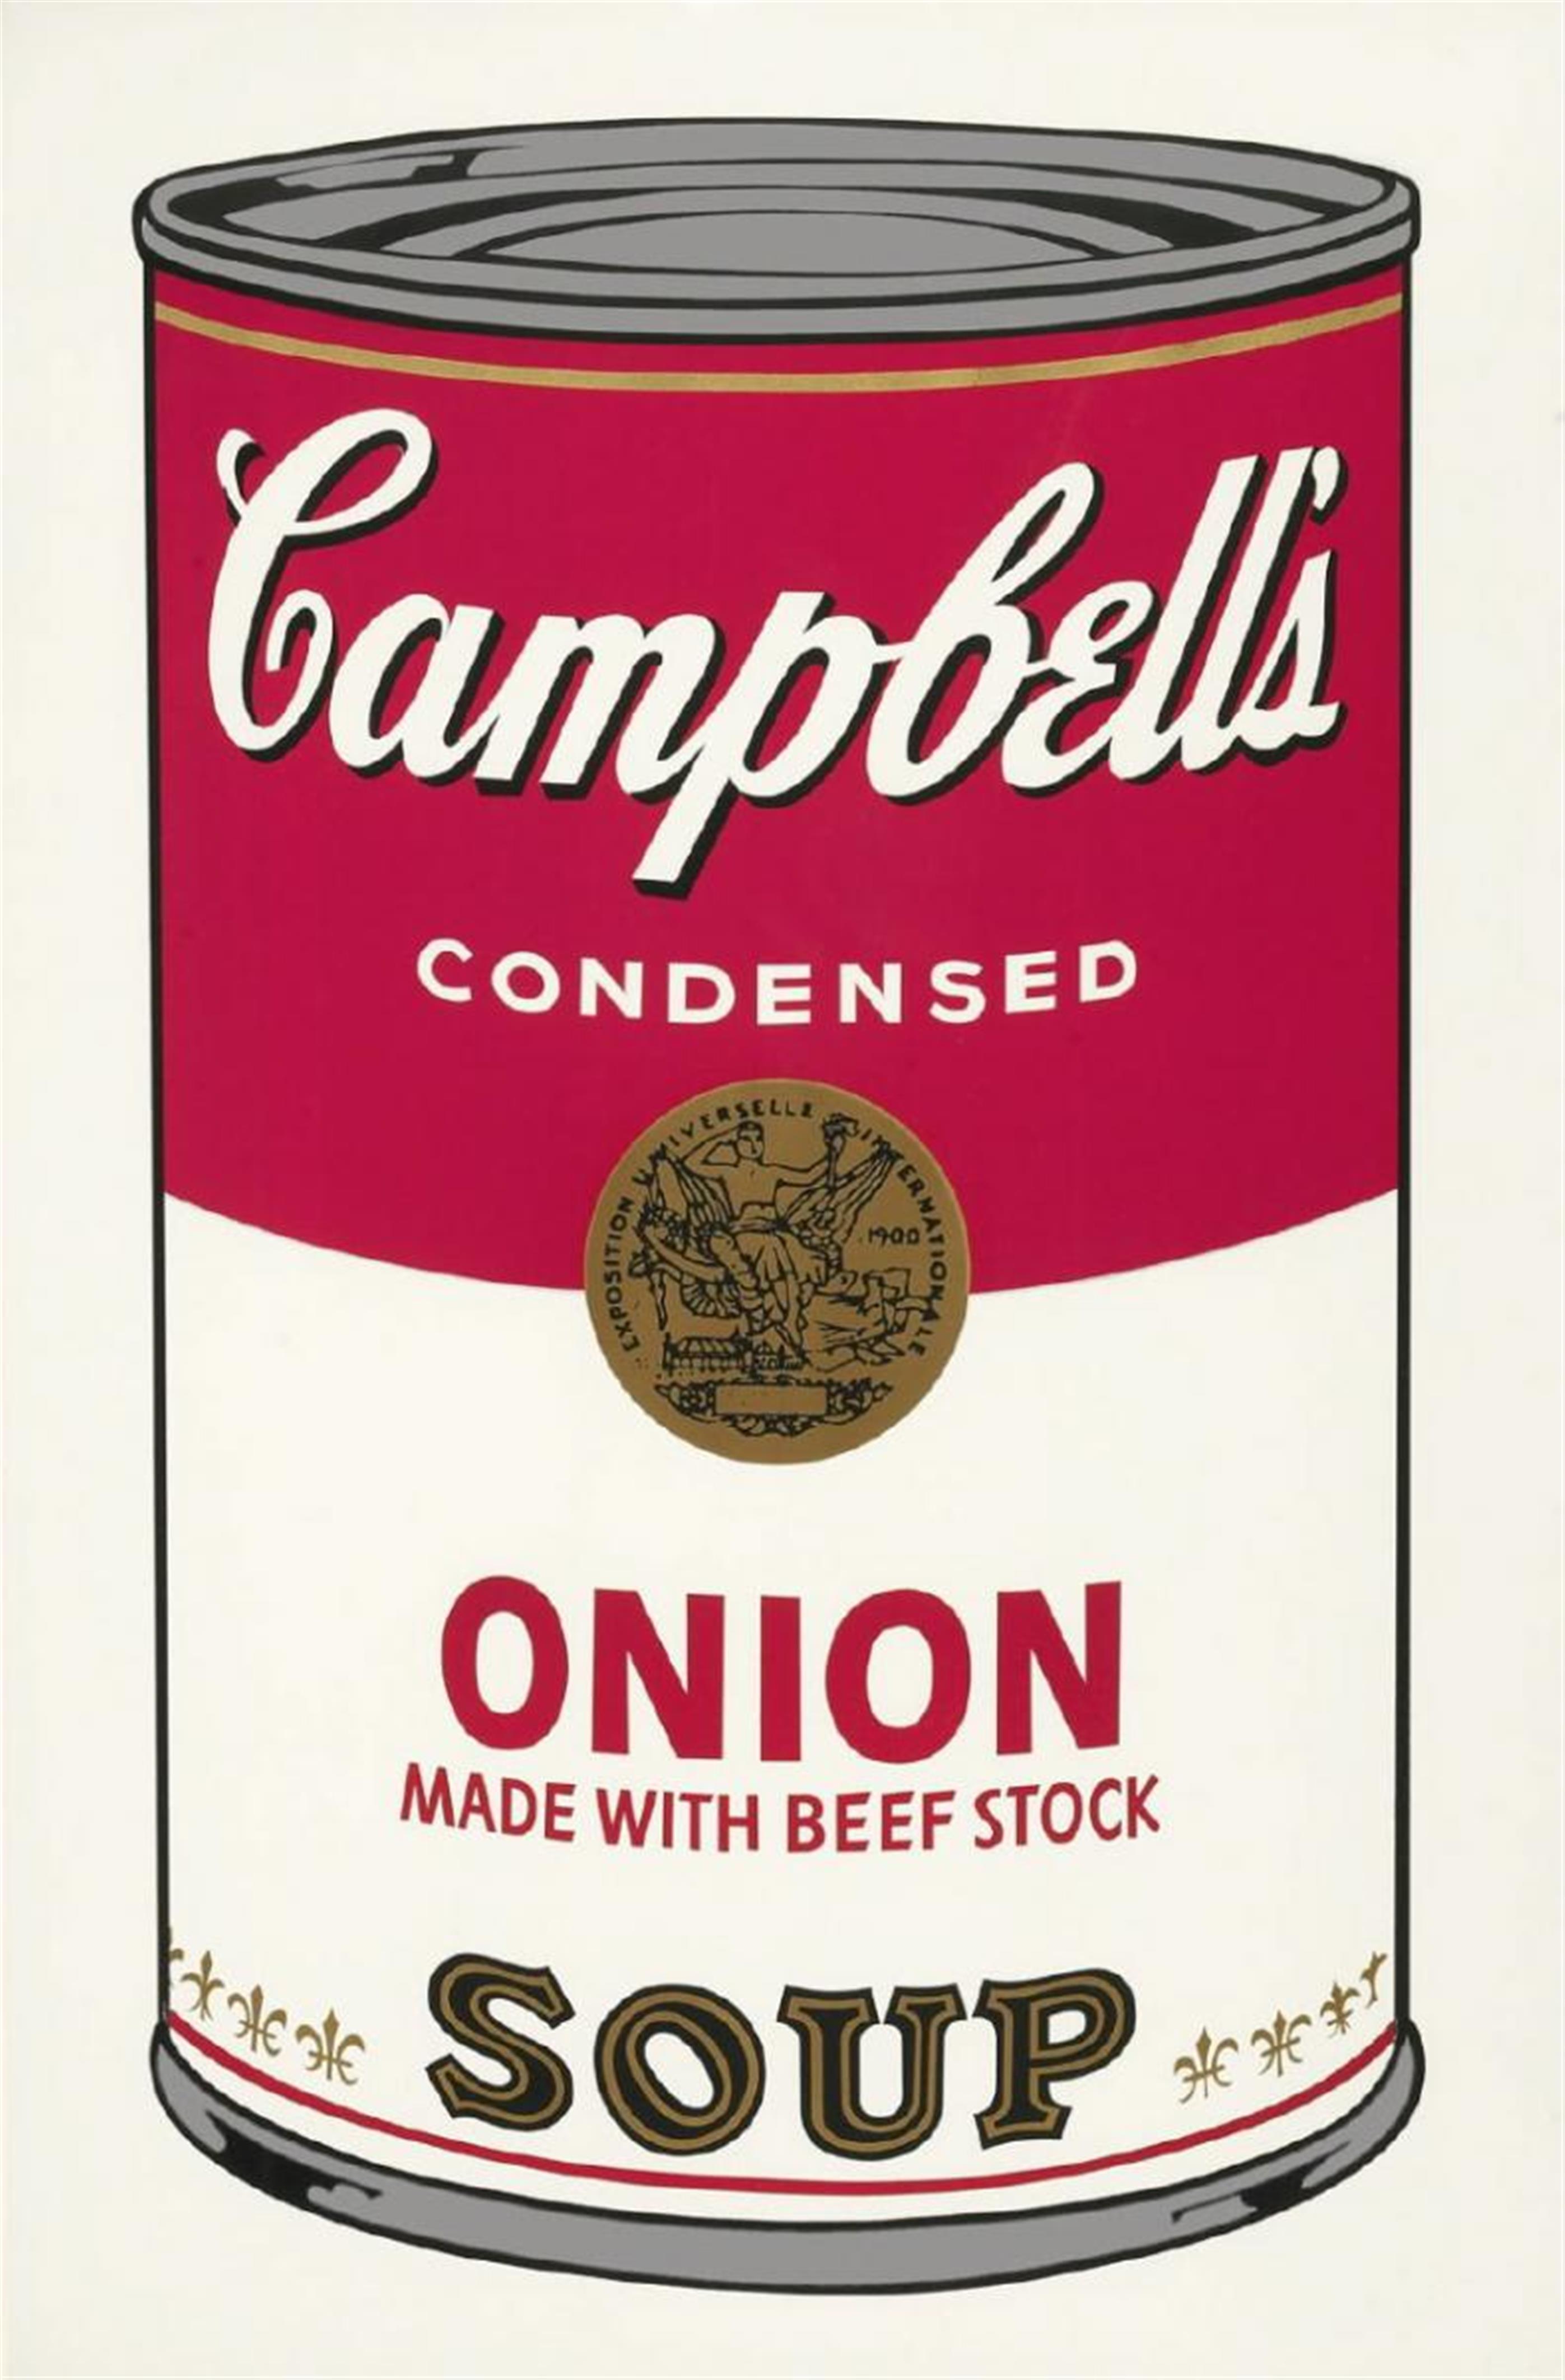 Andy Warhol - Campbell's Soup - image-1